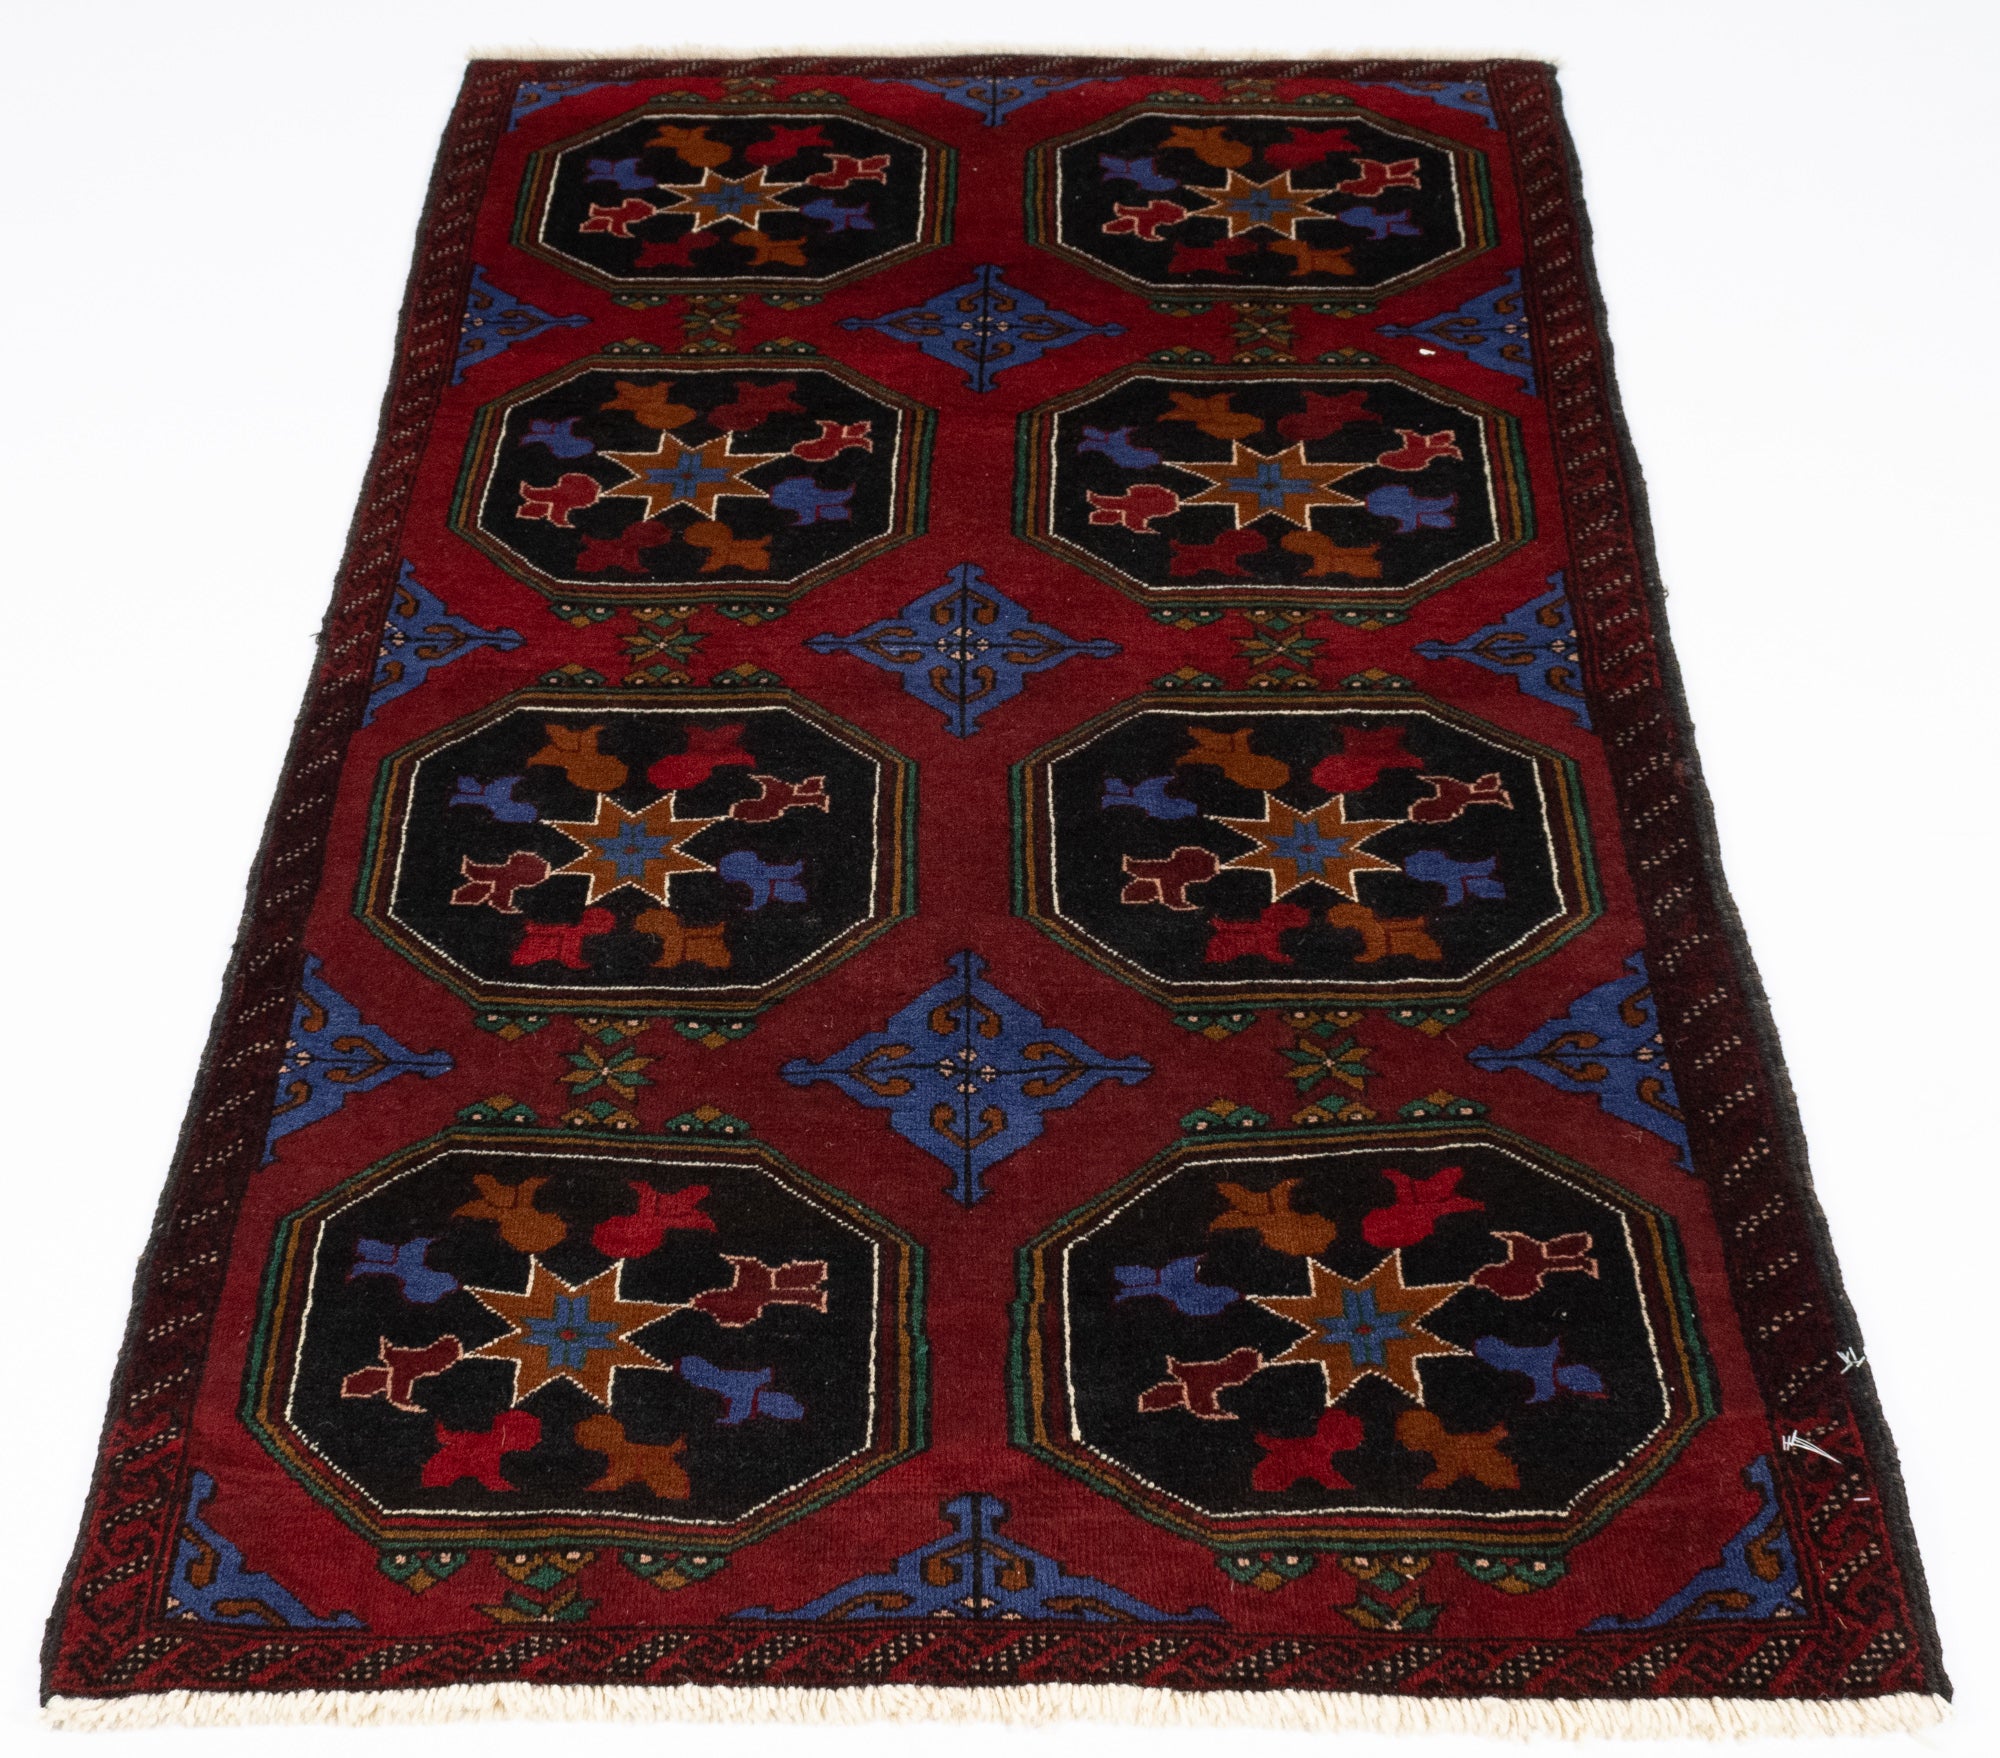 New Persian Balouch Rug <br> 3' 10 x 6' 7